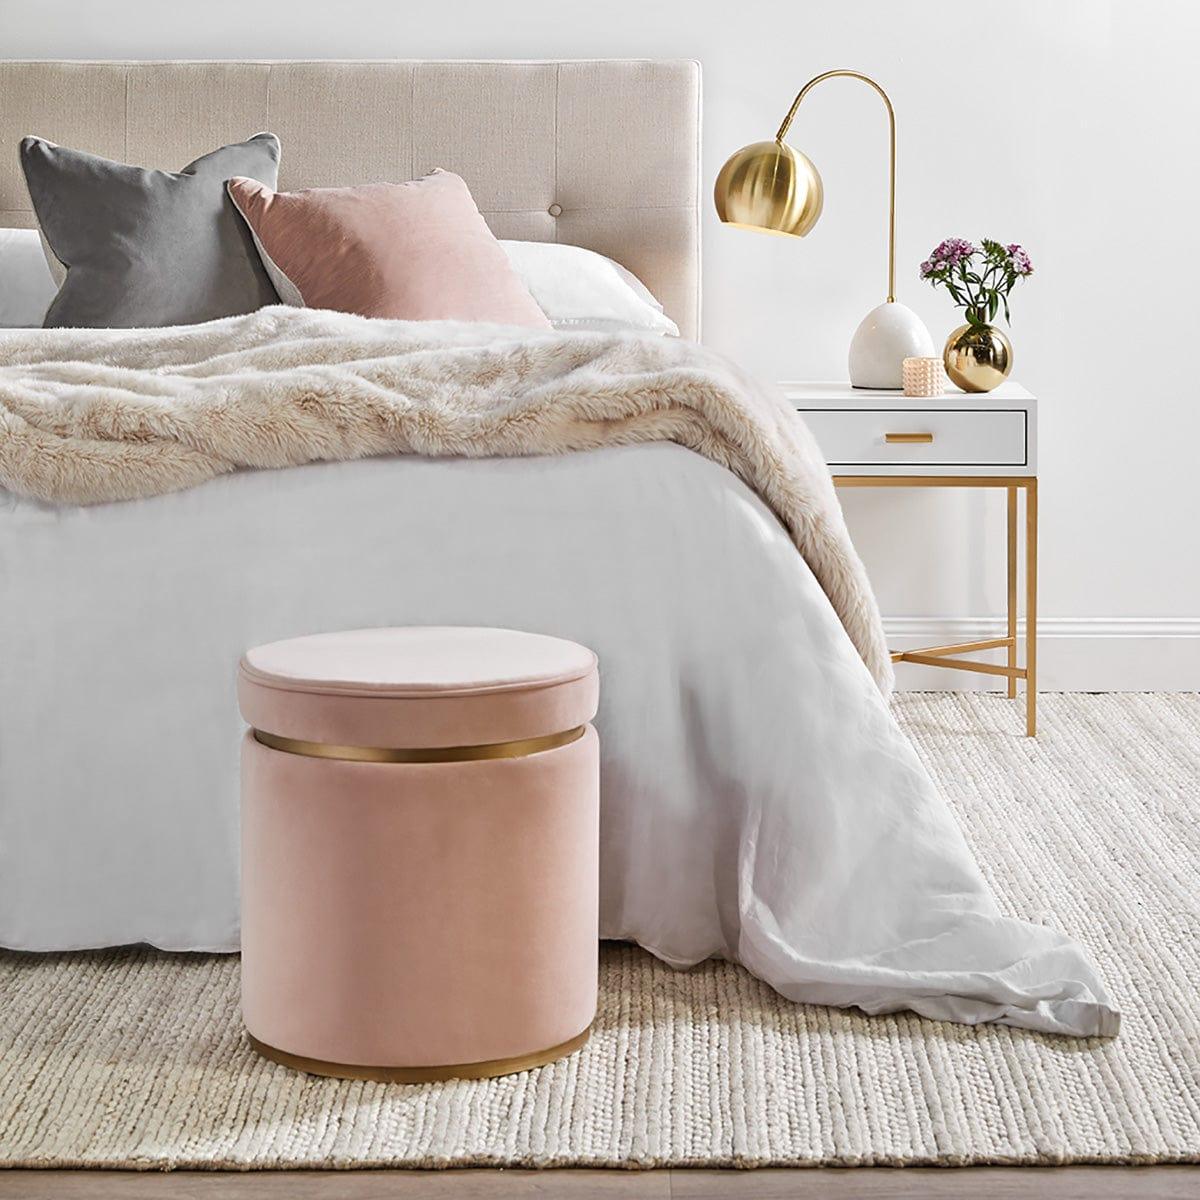 House Journey Nessa White Bedside Table - Gold